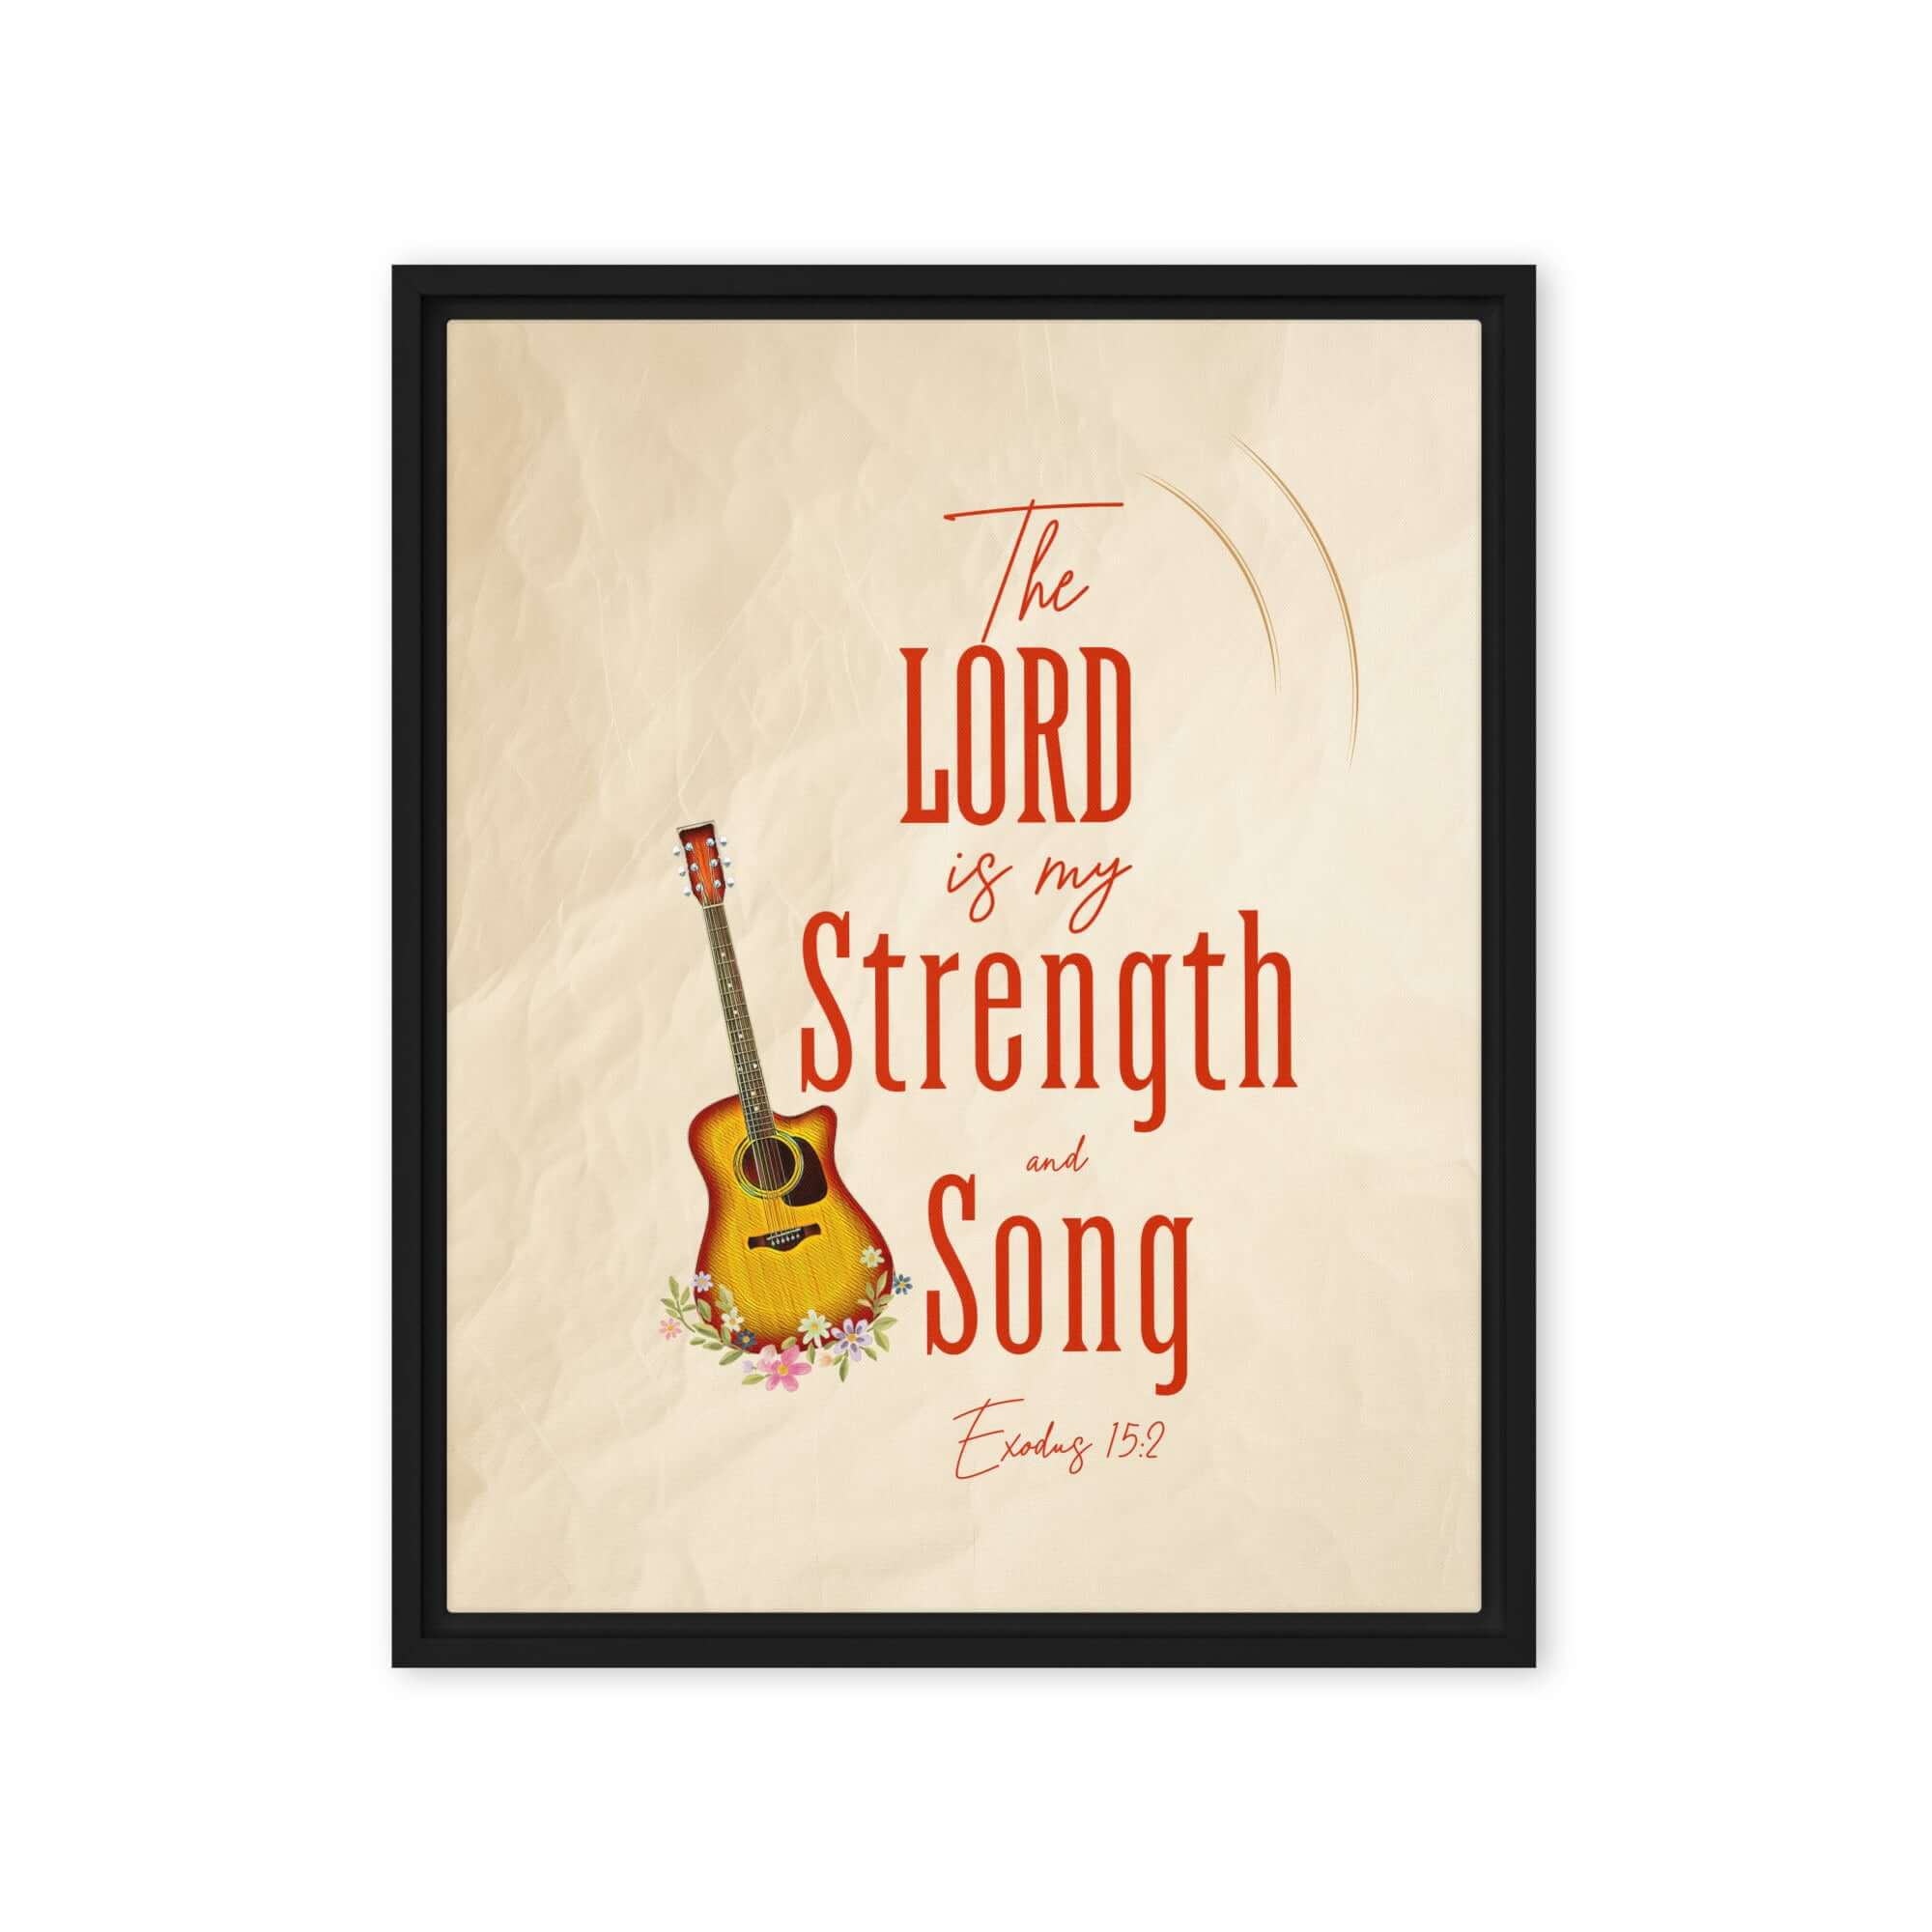 Exodus 15:2 - The LORD is my strength Framed Canvas